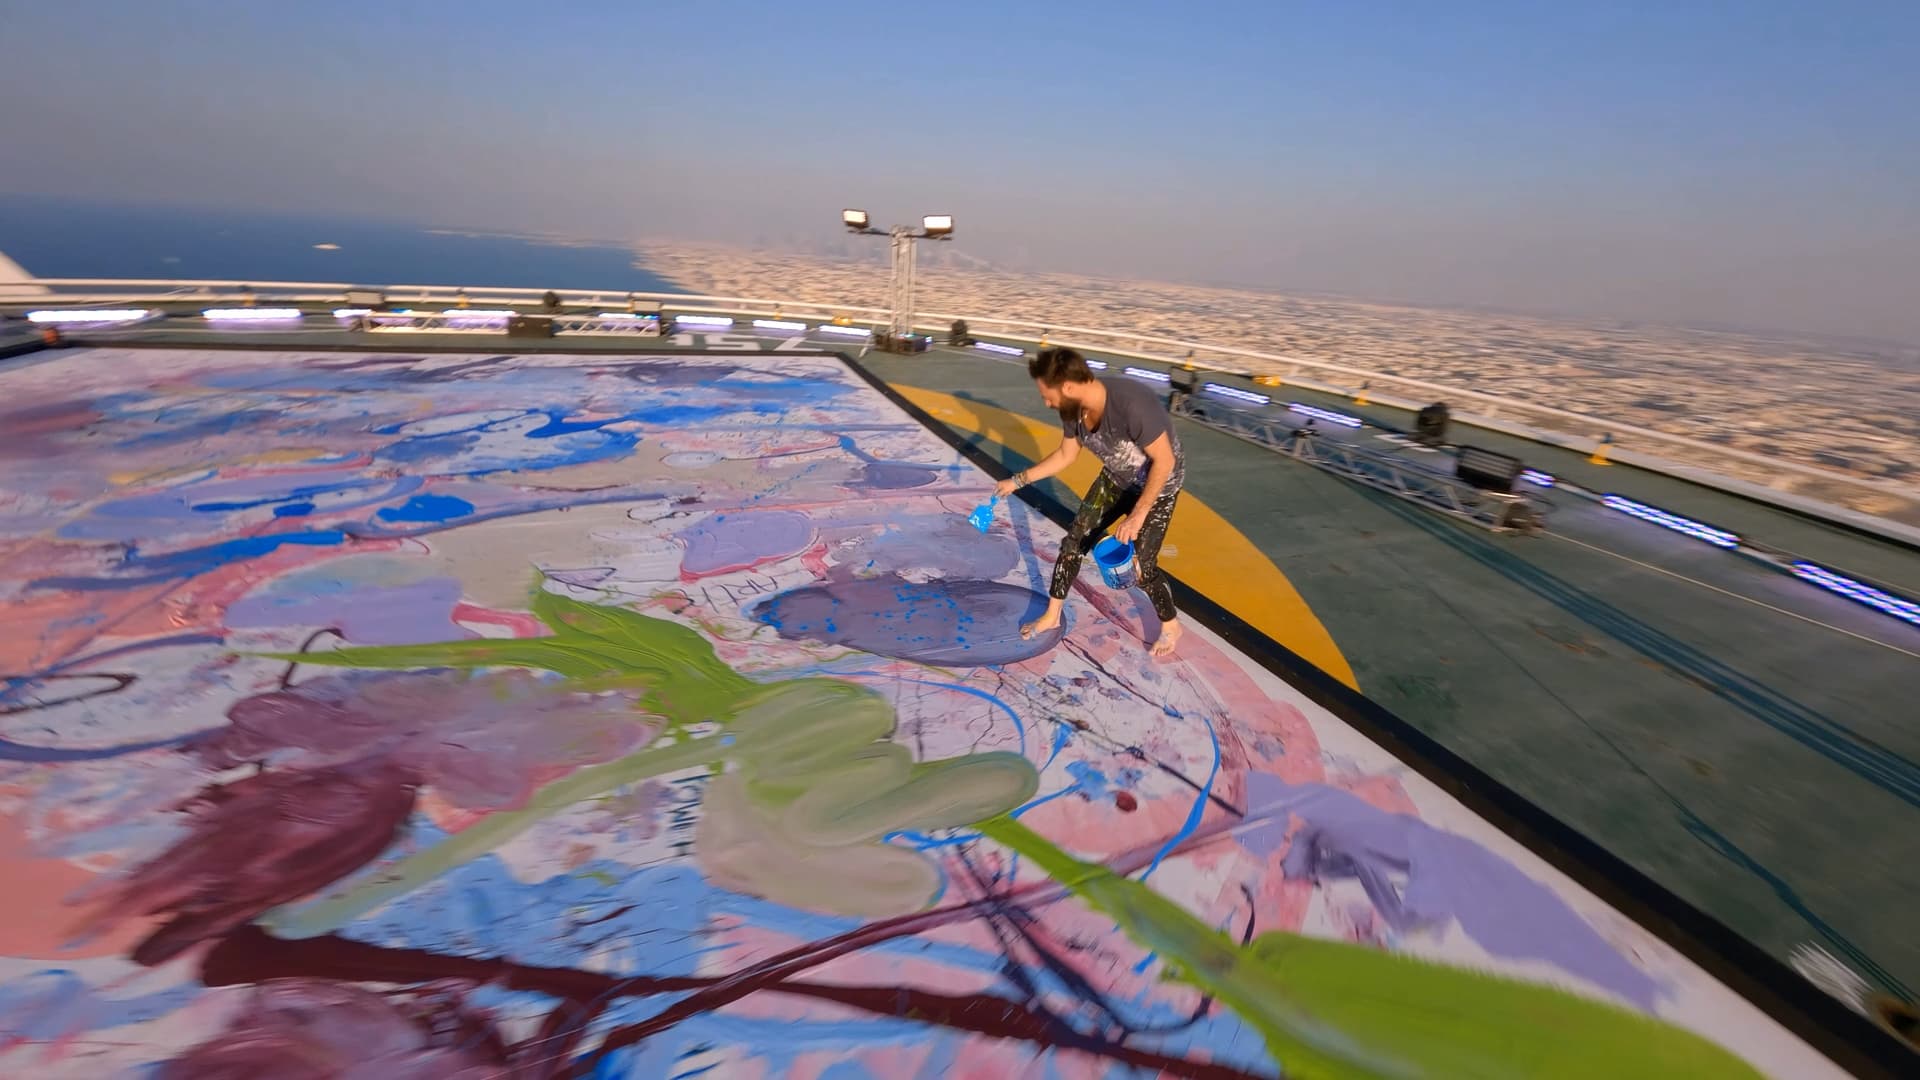 Artist Sacha Jafri painting on the helipad at the Burj Al Arab Jumeirah hotel in Dubai. He held an exhibition of 30 works on the landing pad in 2022.